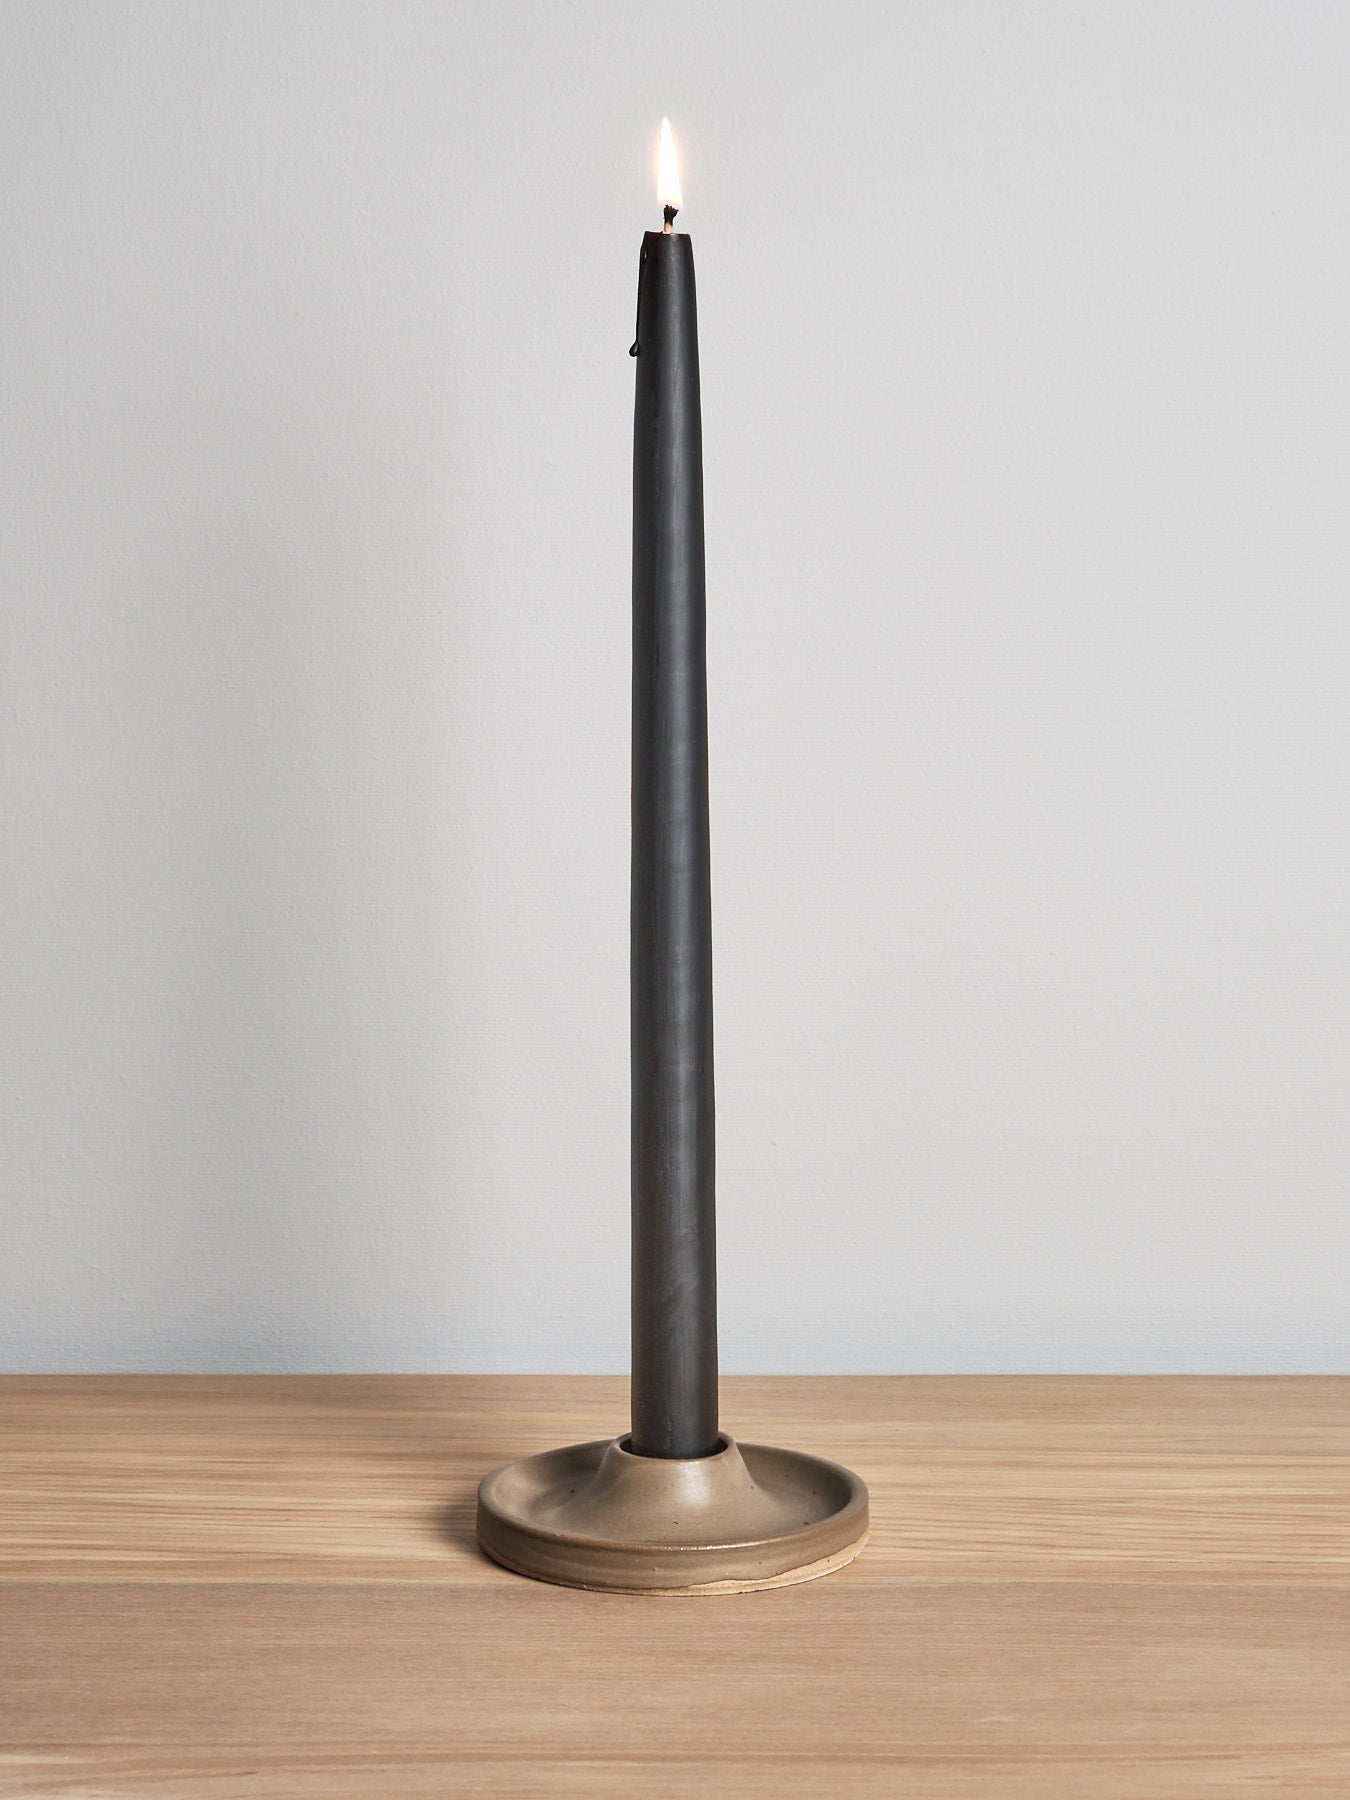 A Candle Holder – Moss by deborah sweeney on a wooden table.